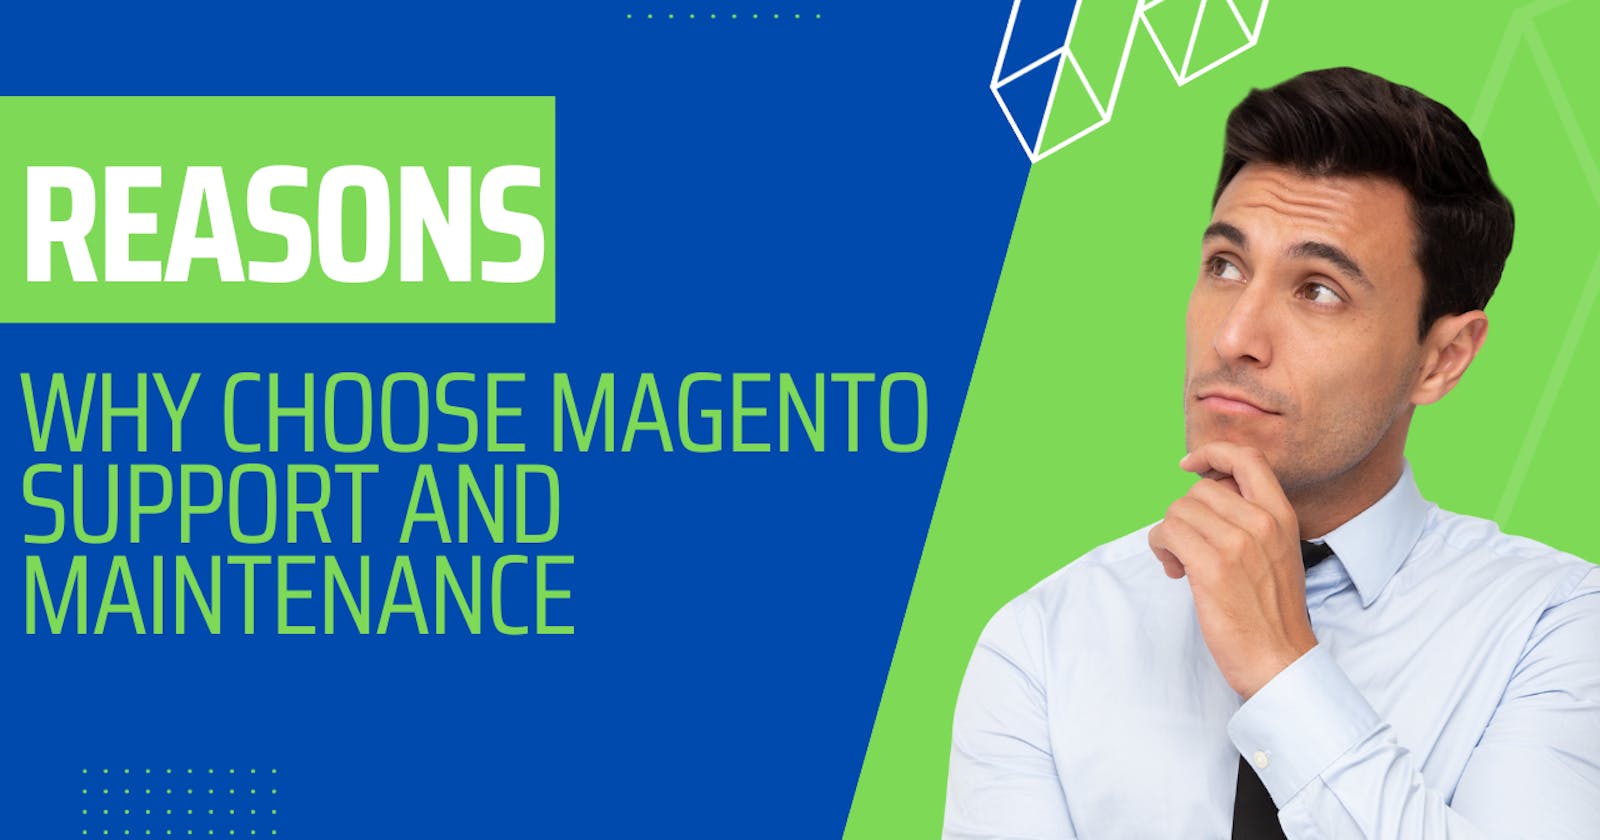 Reasons why Magento support and maintenance should be chosen